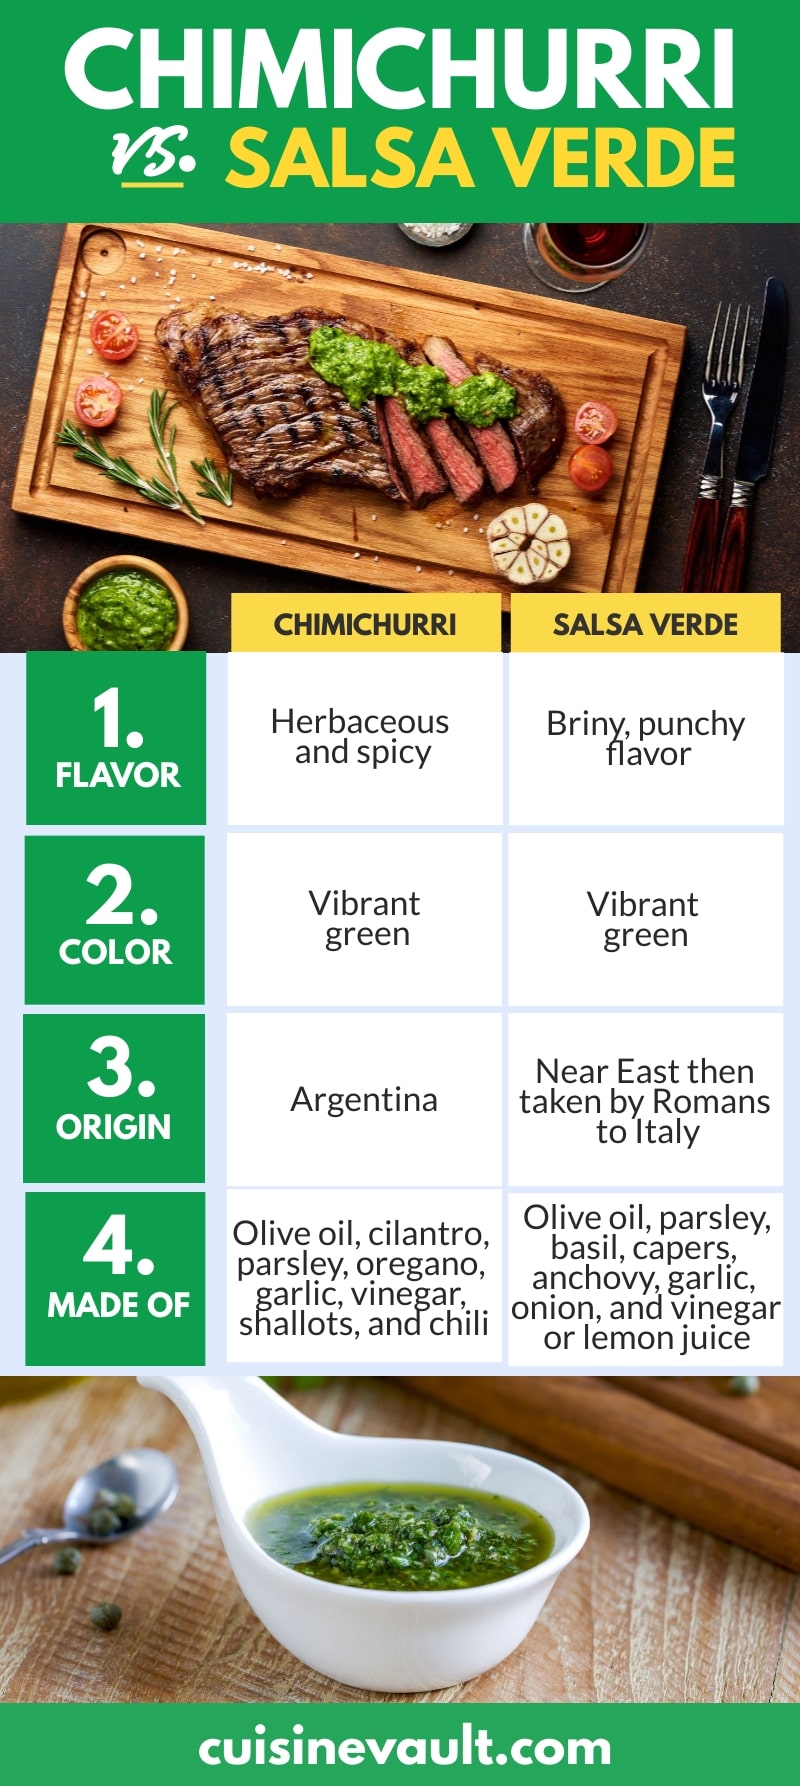 A comparison infographic of salsa verde and chimichurri